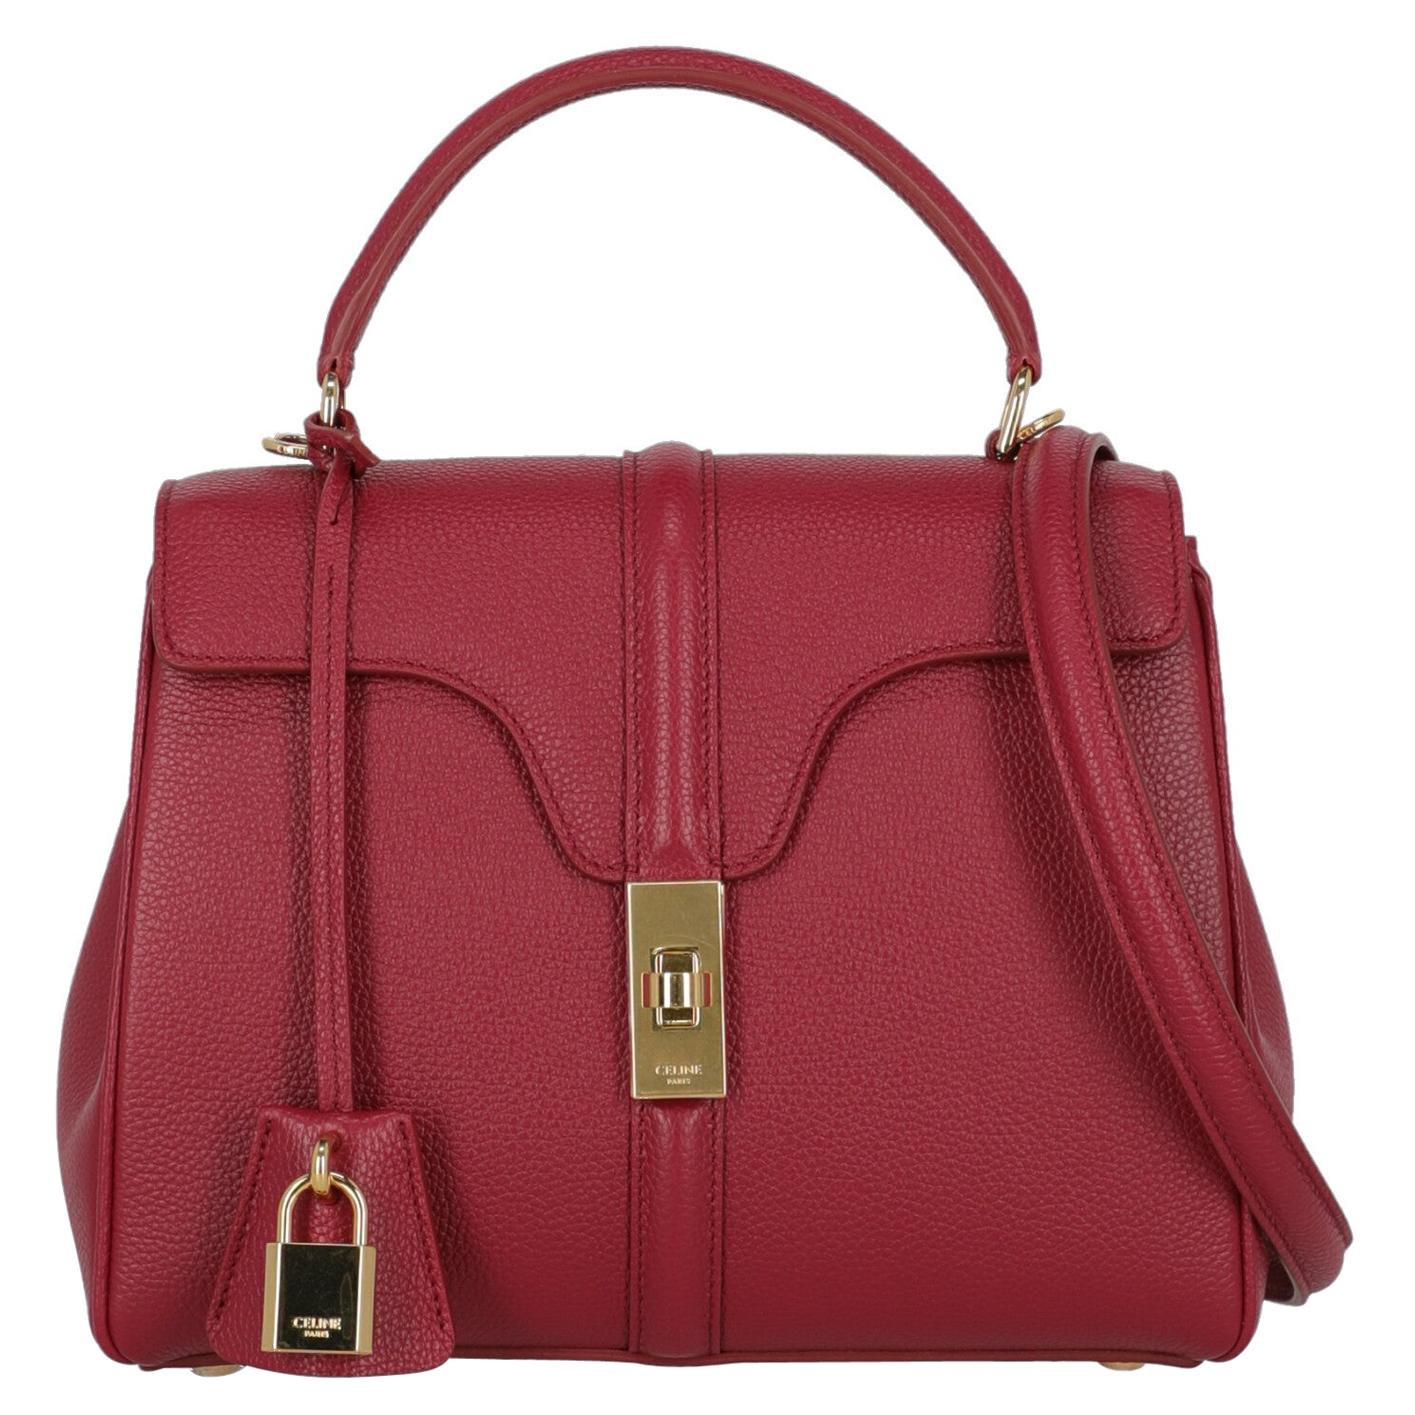 Celine Tricolor Leather and Suede Medium Trapeze Bag For Sale at 1stDibs